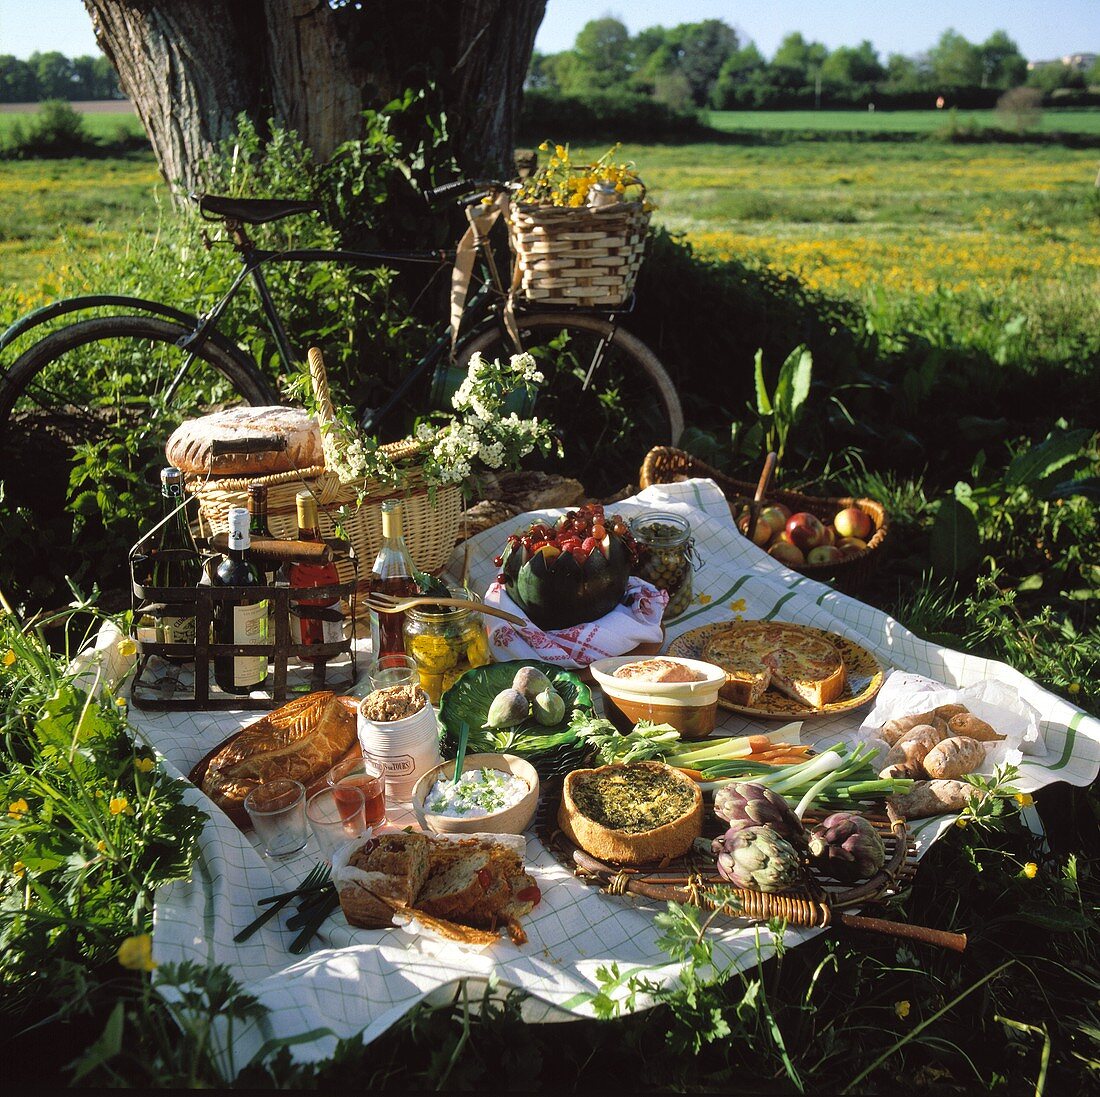 Picnic with quiche and pasties under a tree in the meadow